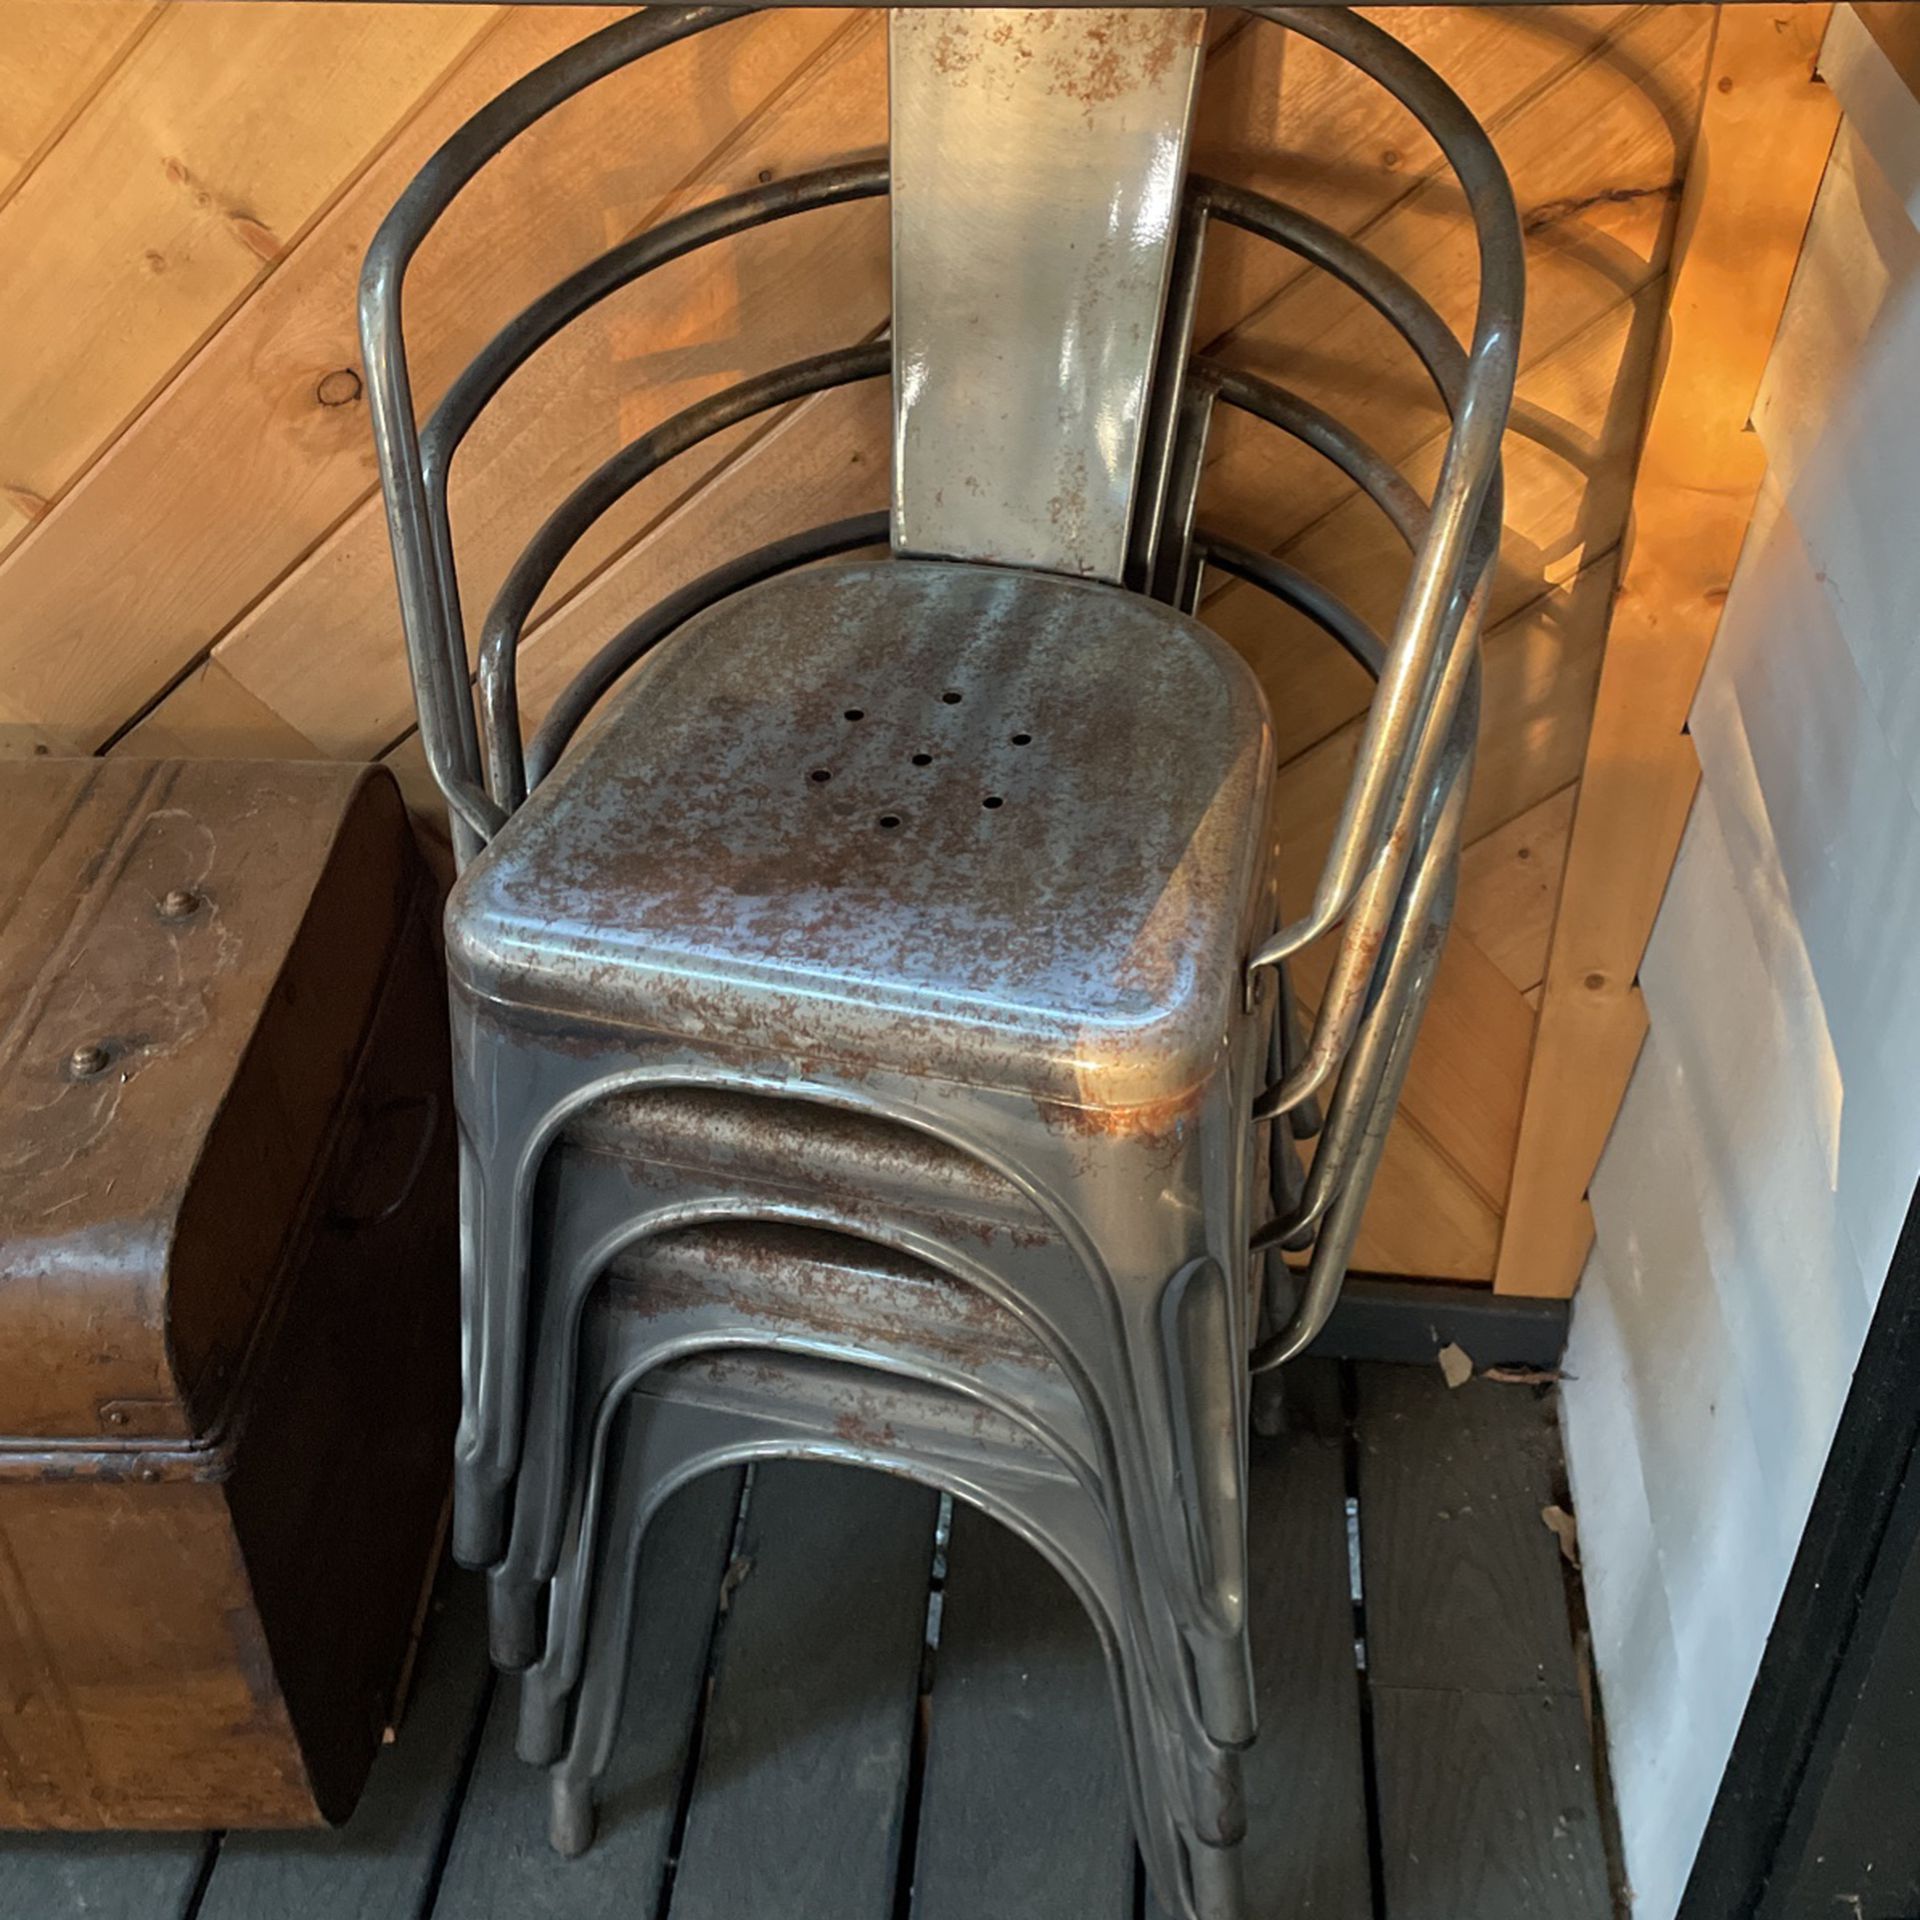 4 Metal Chairs $50 Total Was $350